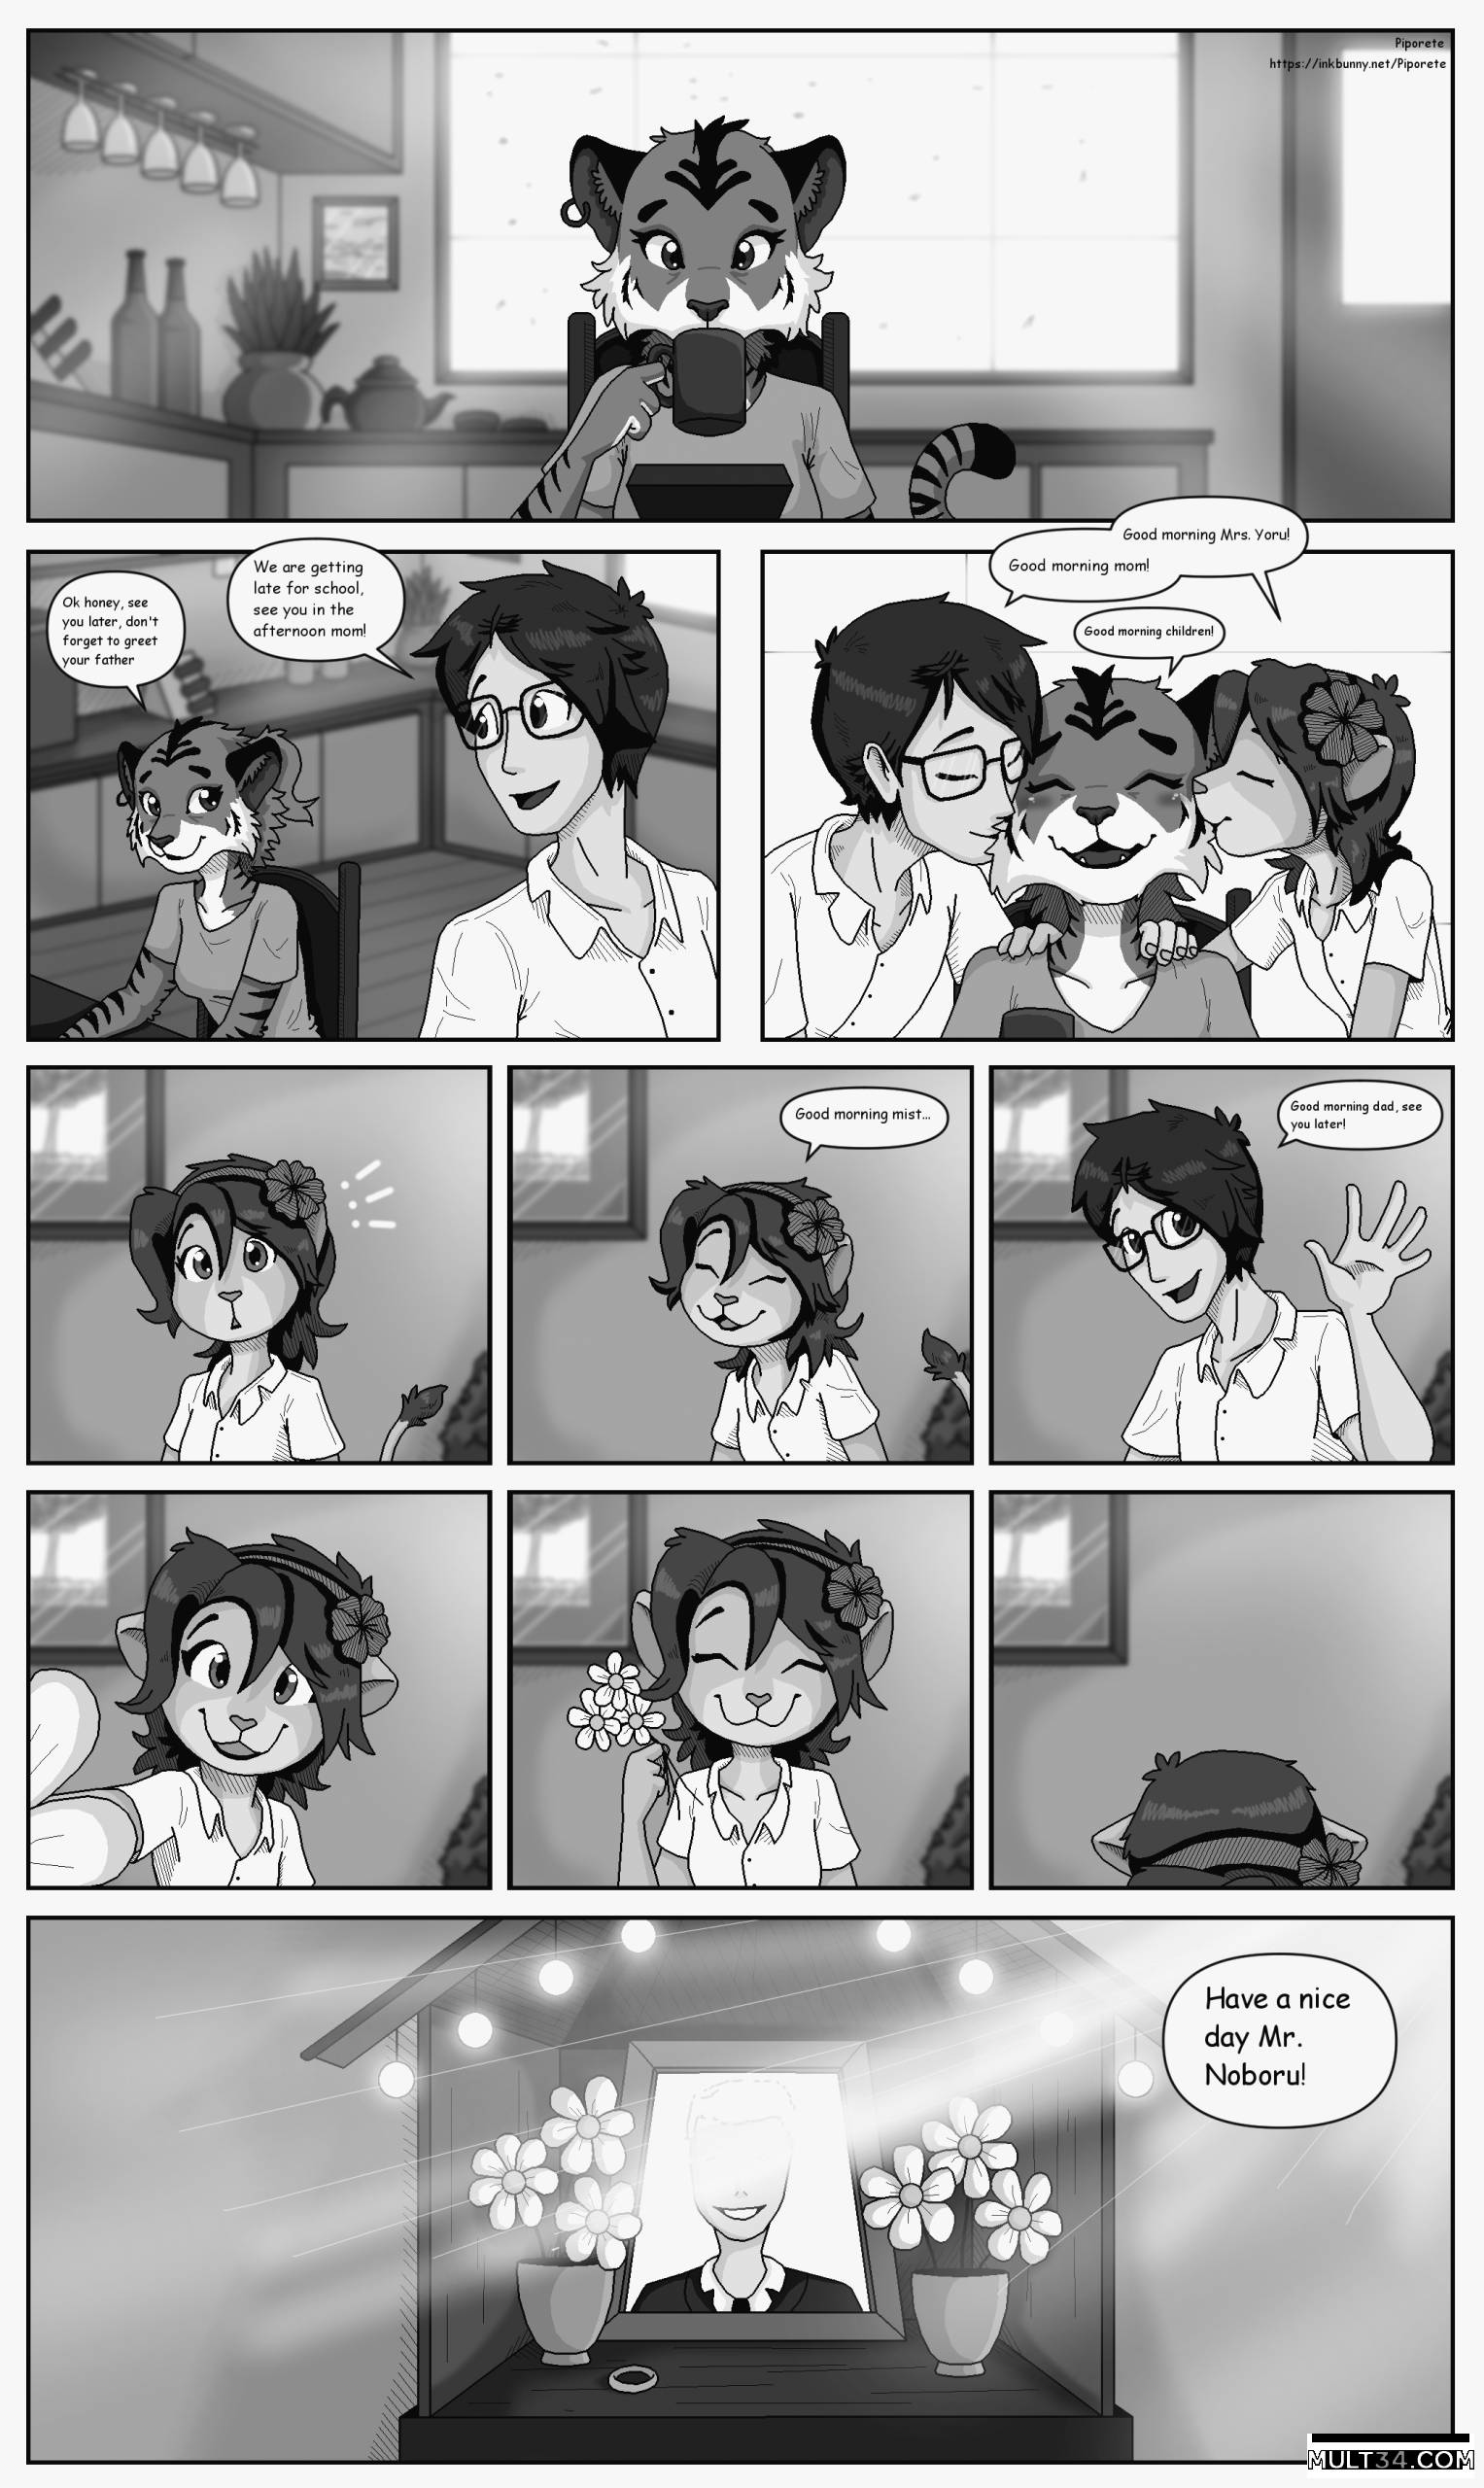 Keiko and Jin - Chapter 1 - 3 page 20